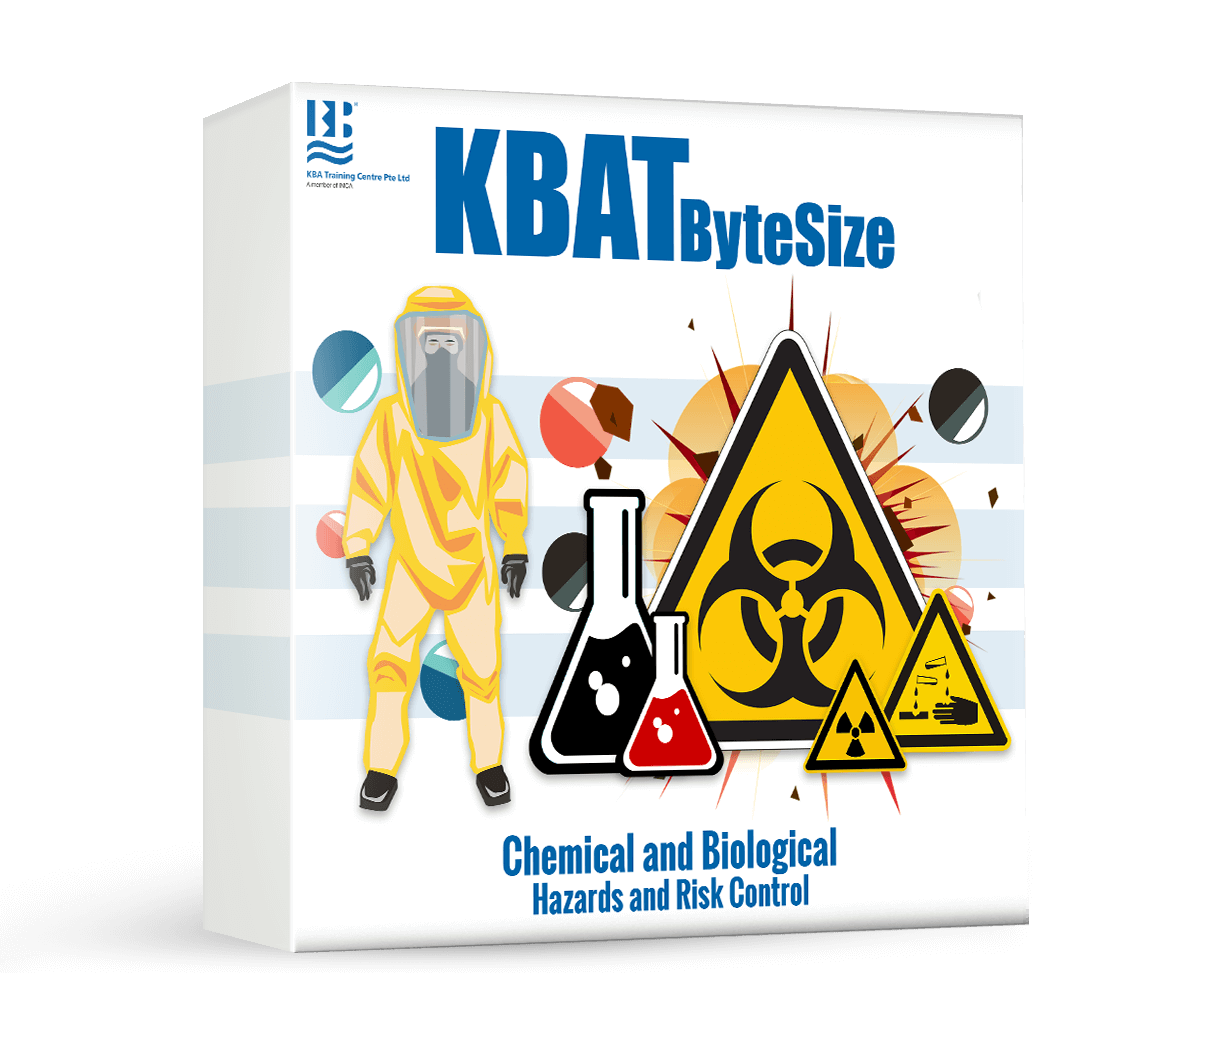 Chemical and Biological Hazards and Risk Control